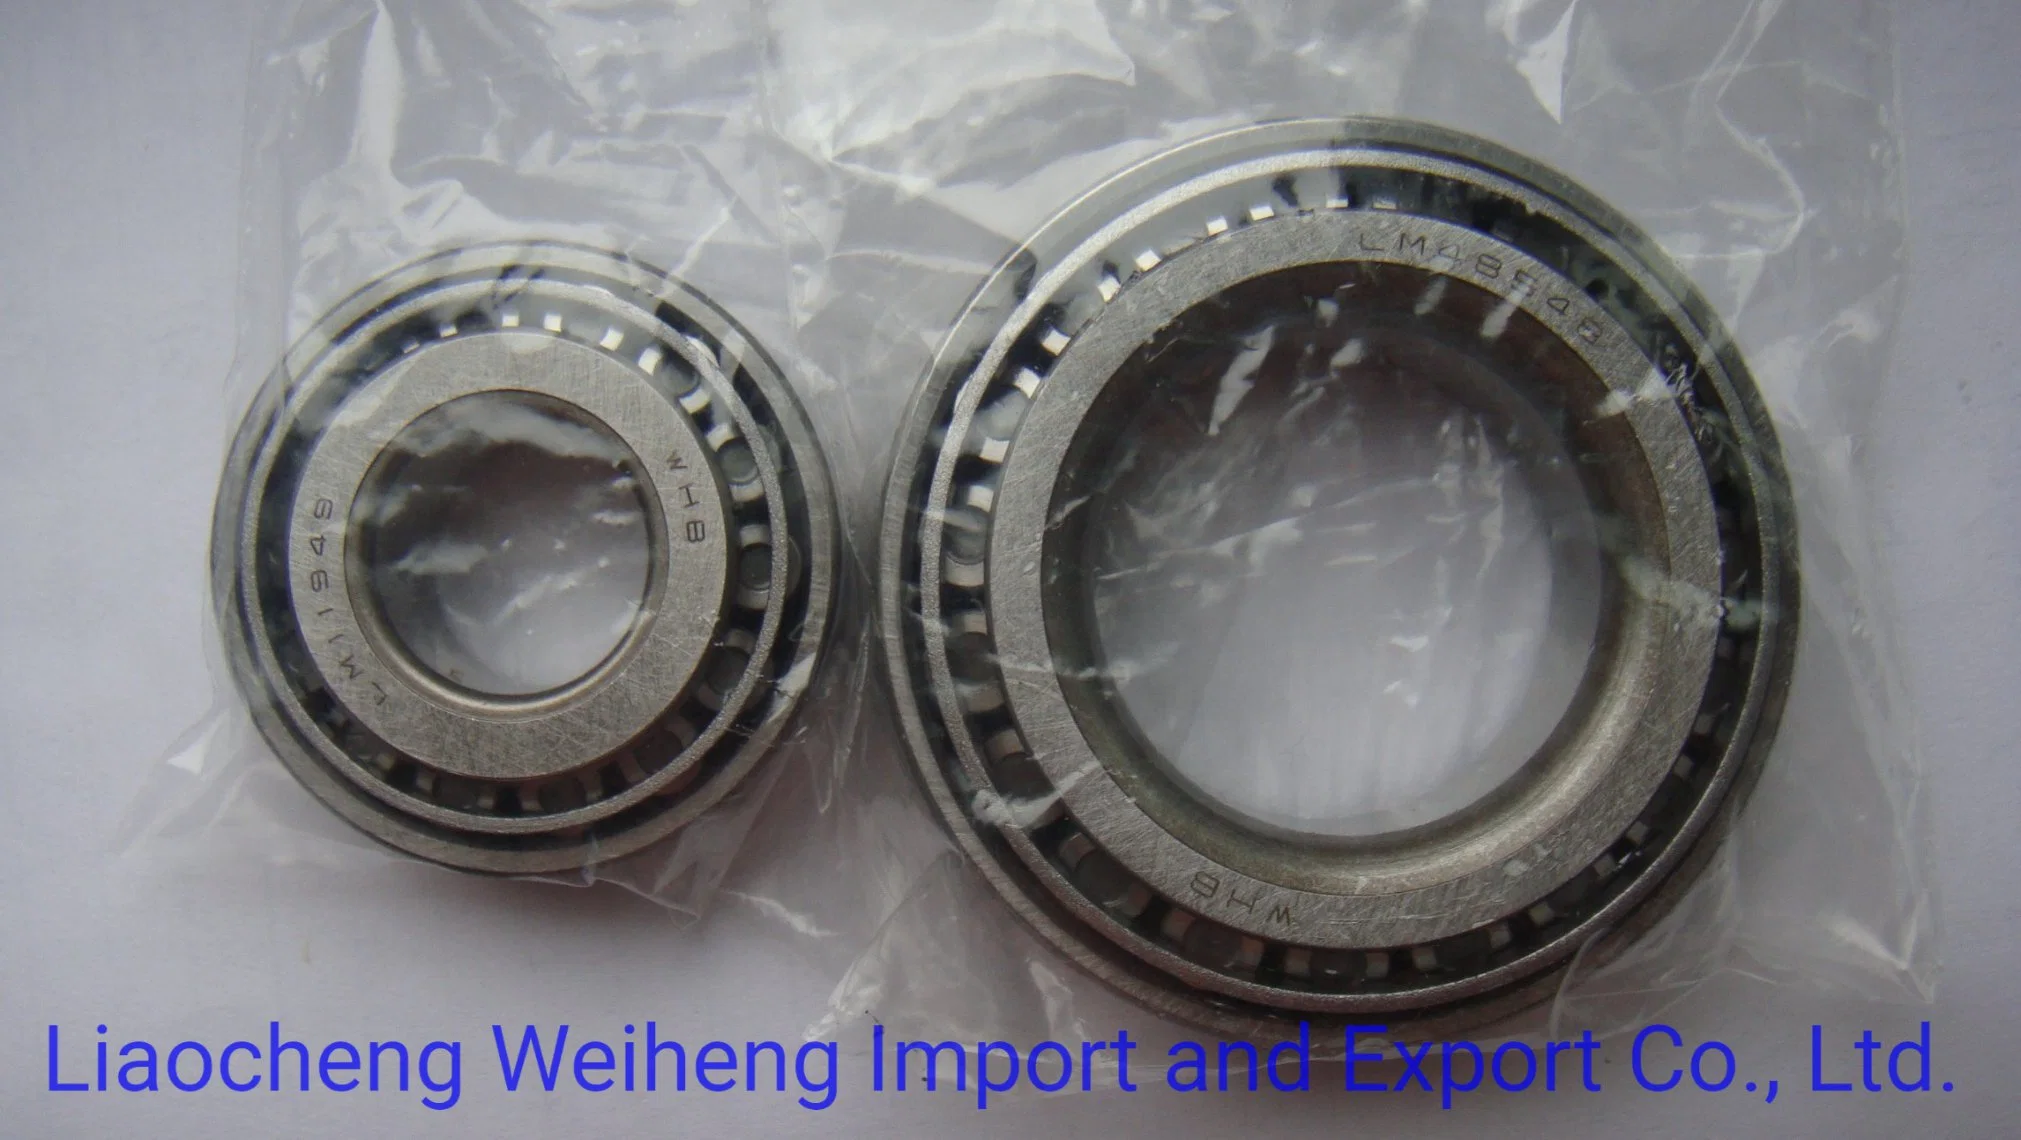 Auto Part, Motorcycle Spare Part, Car Parts Accessories, Tapered Roller Bearing of 30204 30310 32308 352208